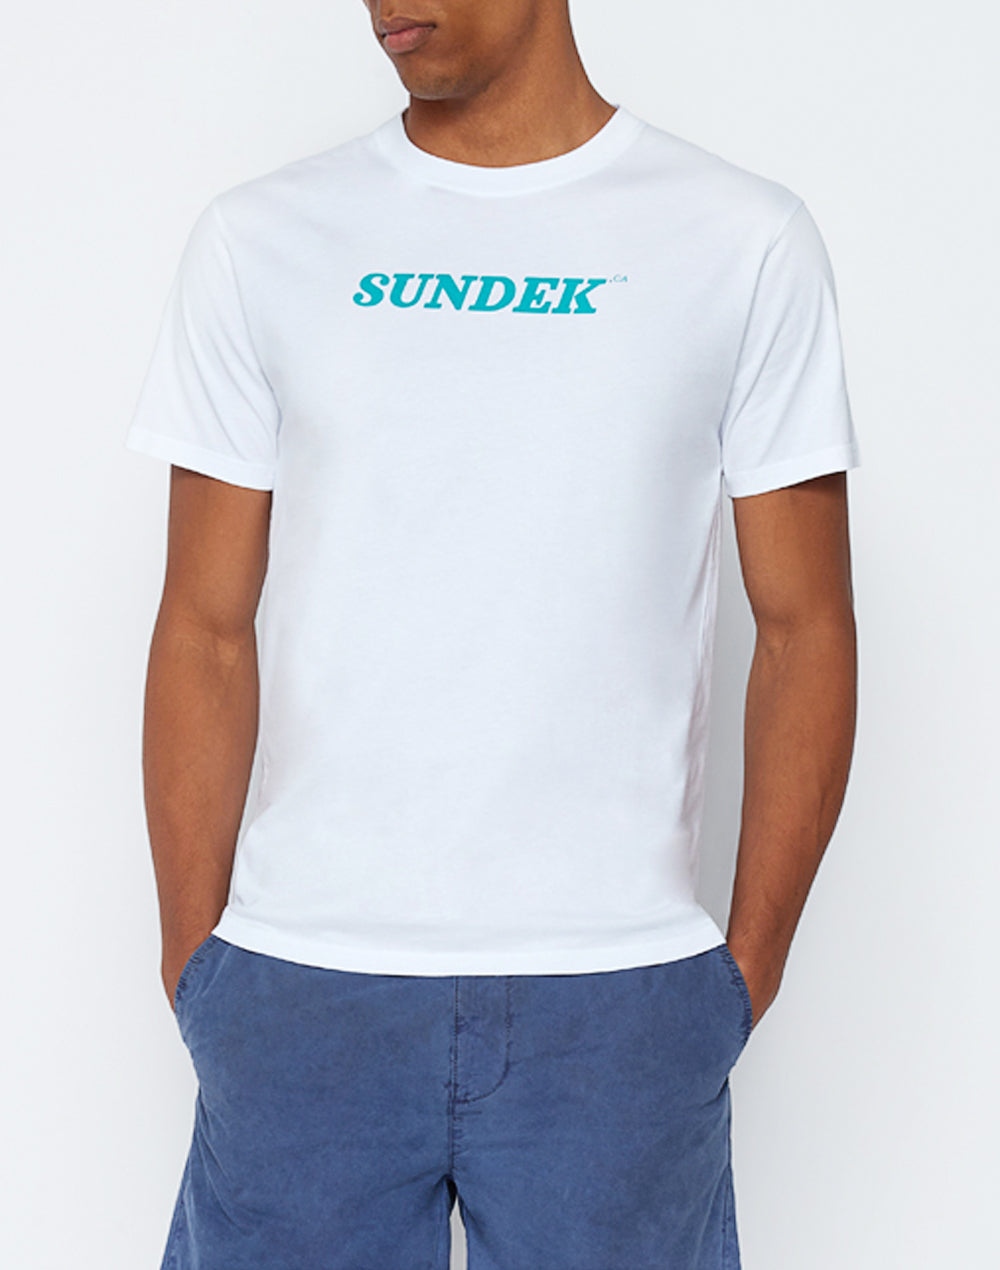 CREW NECK T-SHIRT WITH LOGO